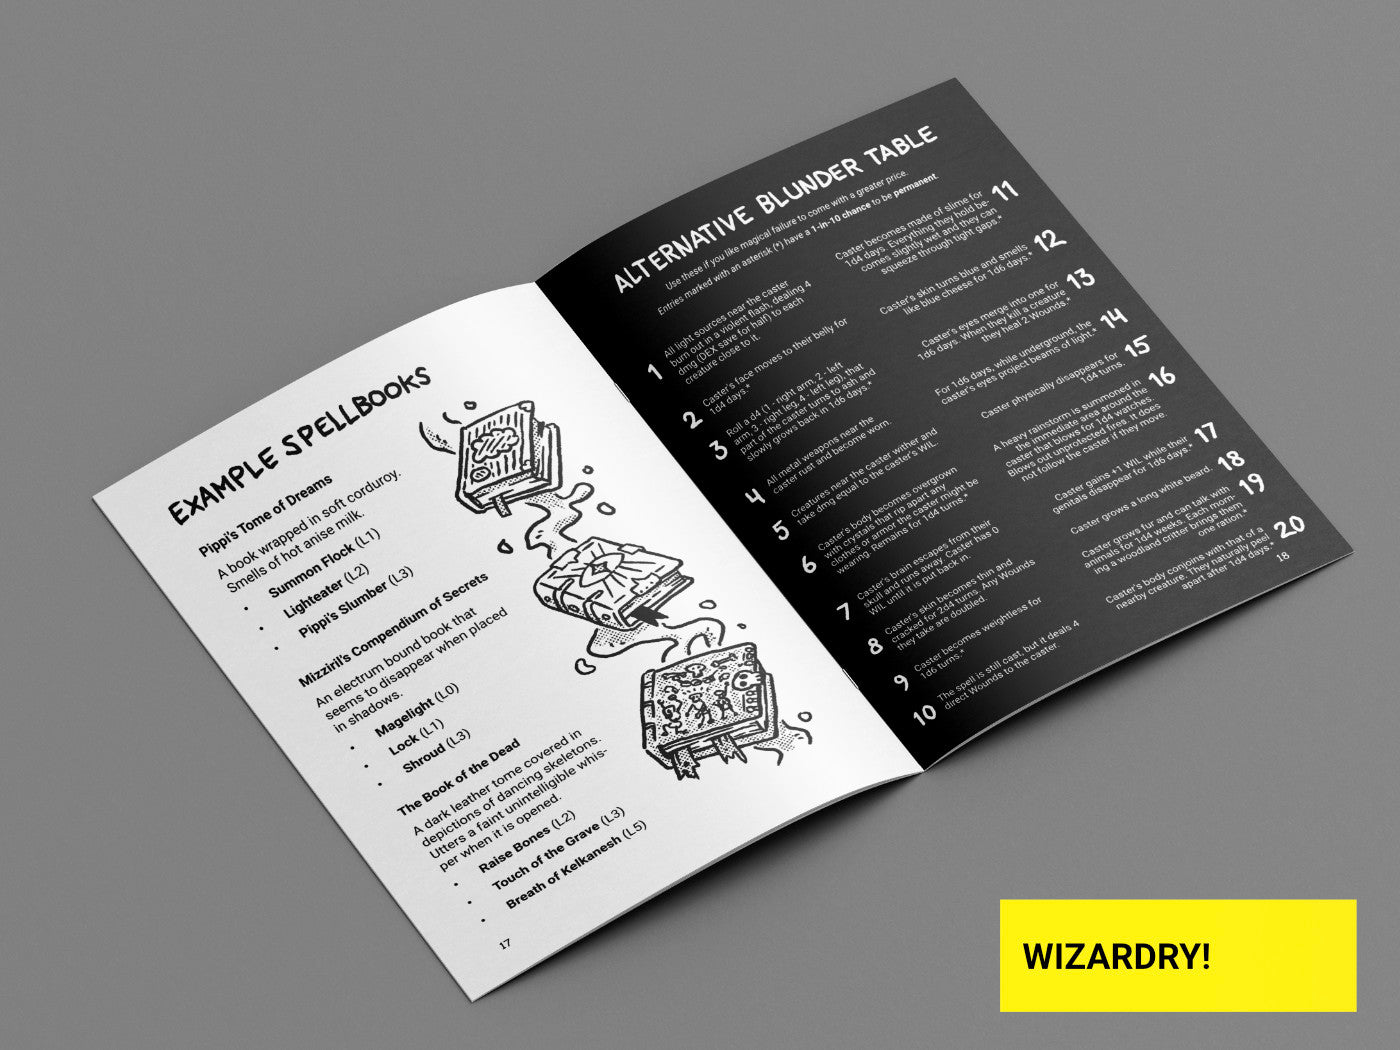 Wizardy! optional magic rules for DURF lightweight RPG by Emiel Boven